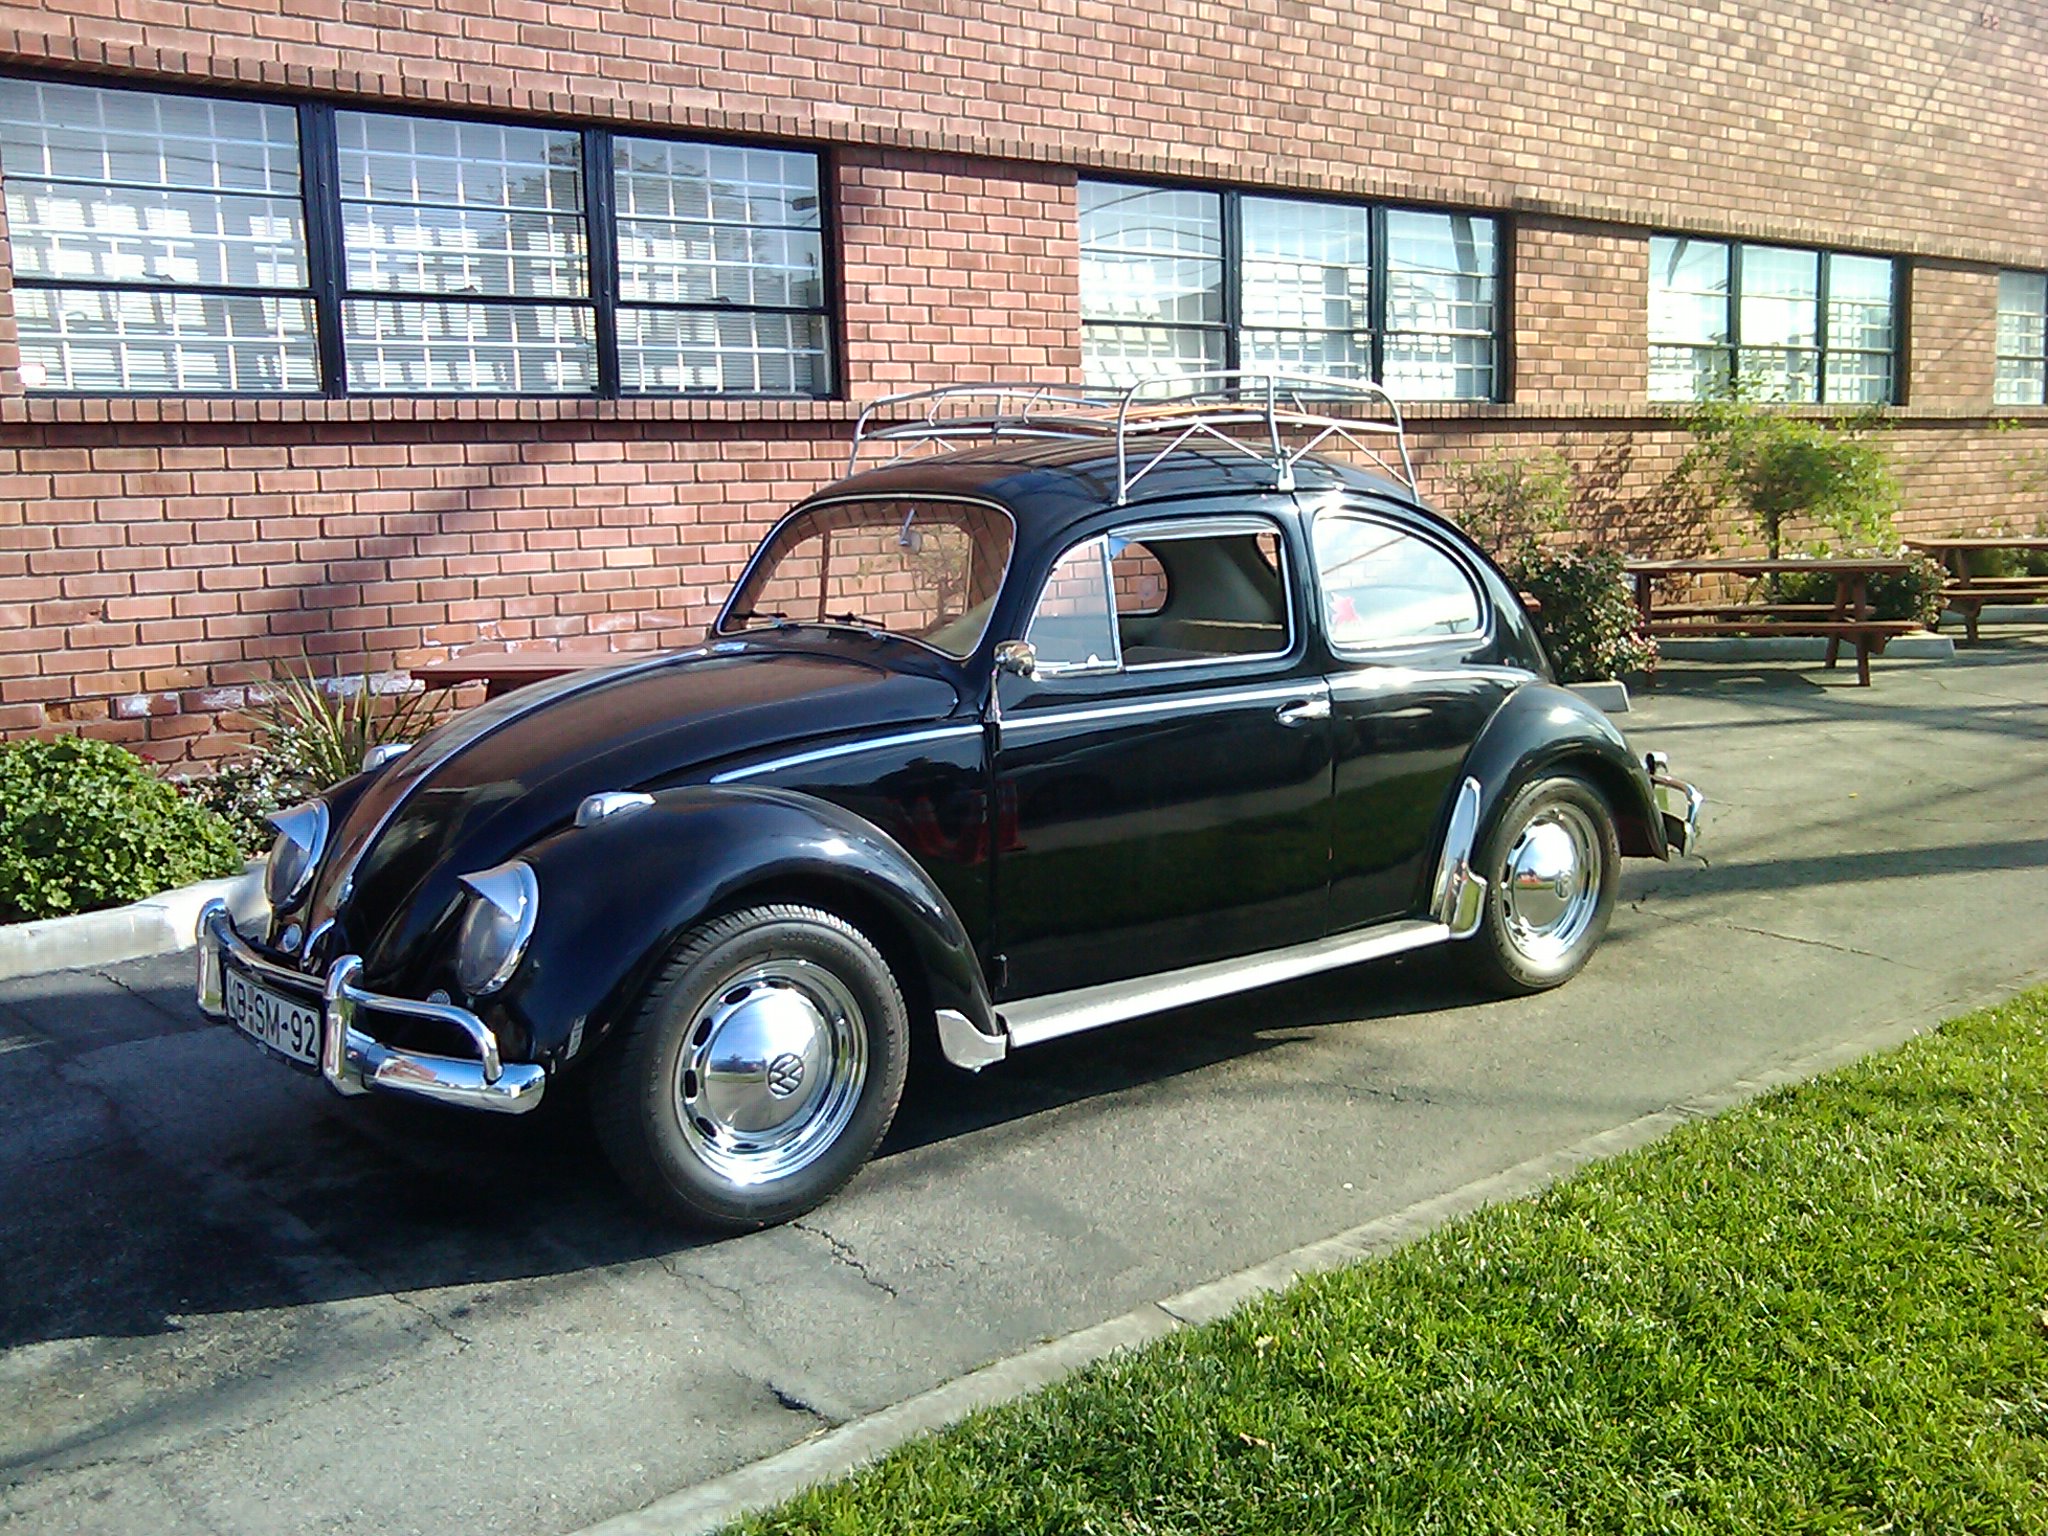 1959 VW Beetle for rent